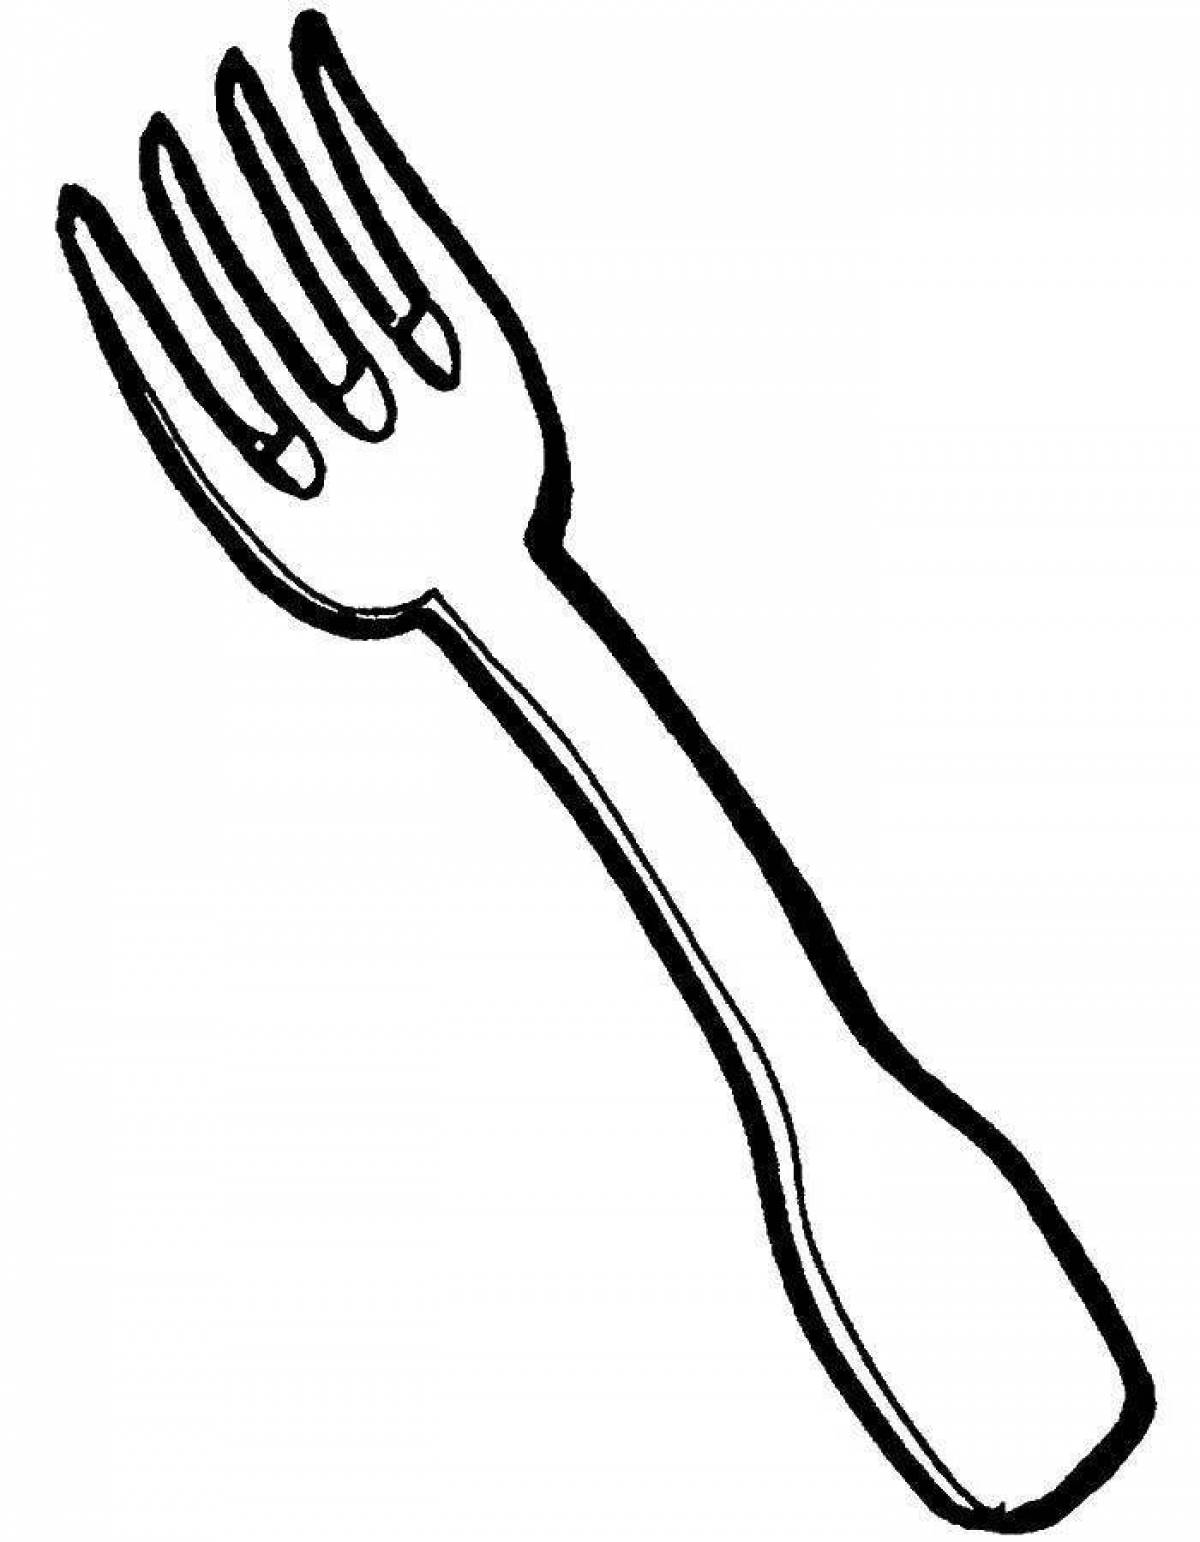 Charming fork for coloring